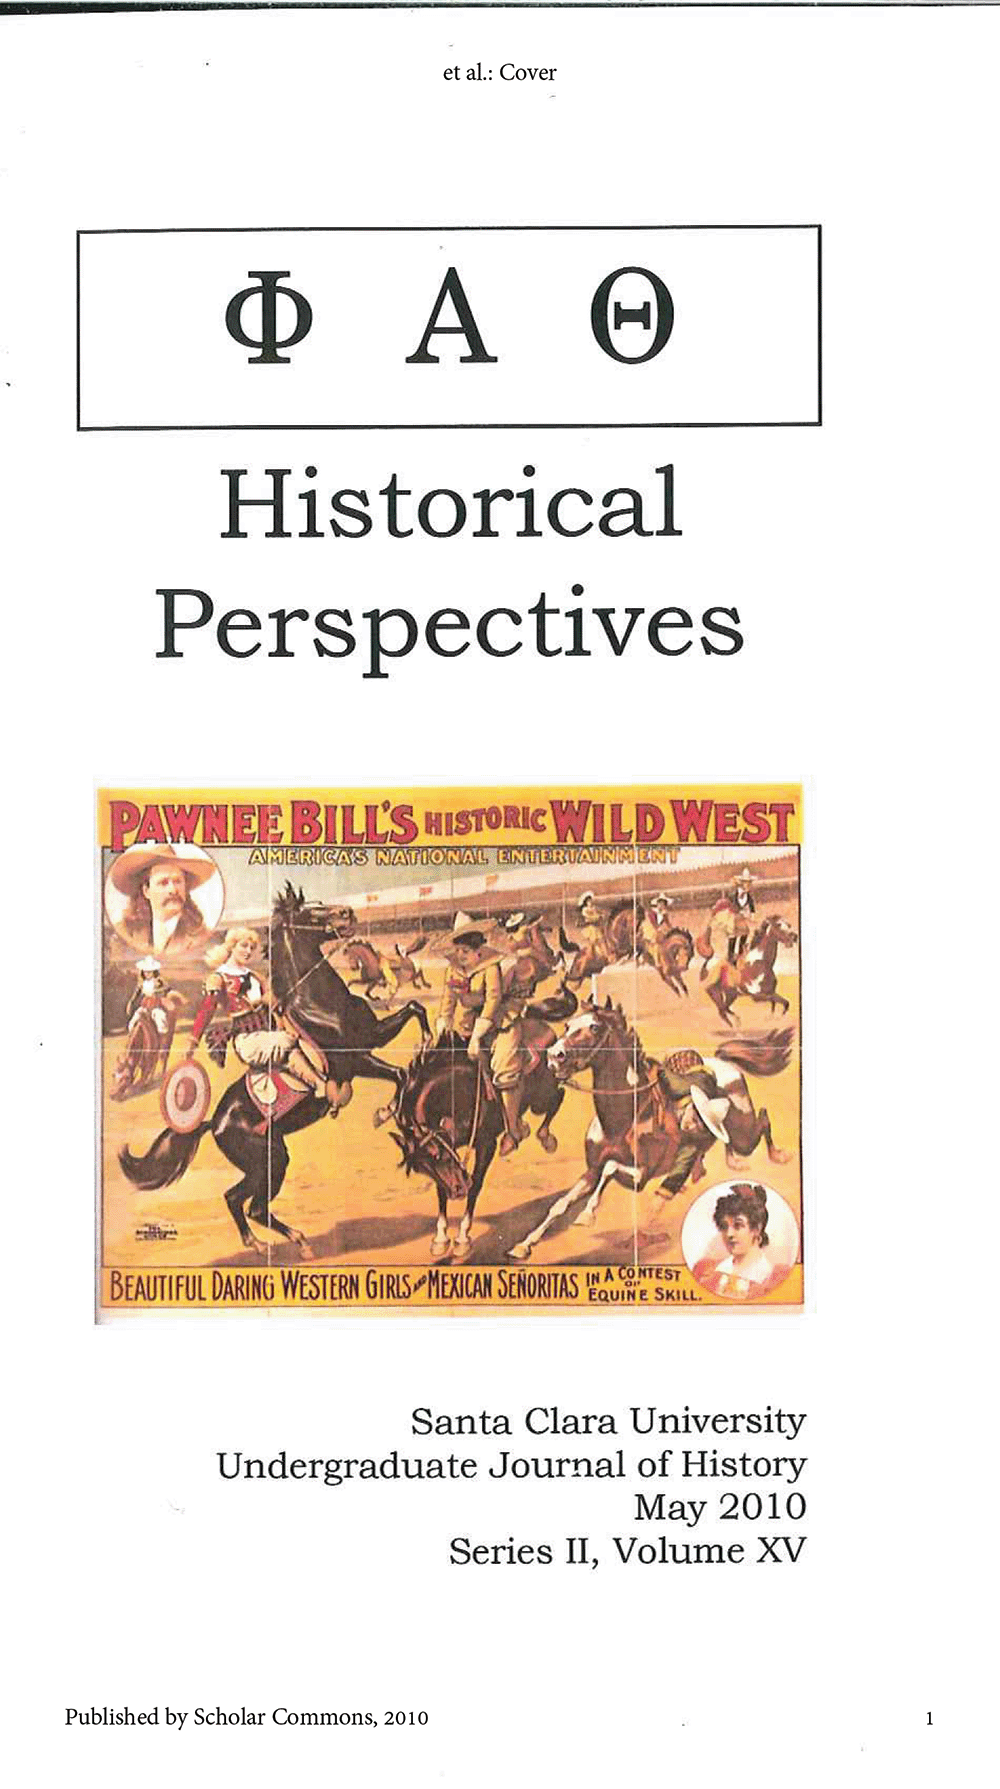 Historical Perspectives 2010, volume 15